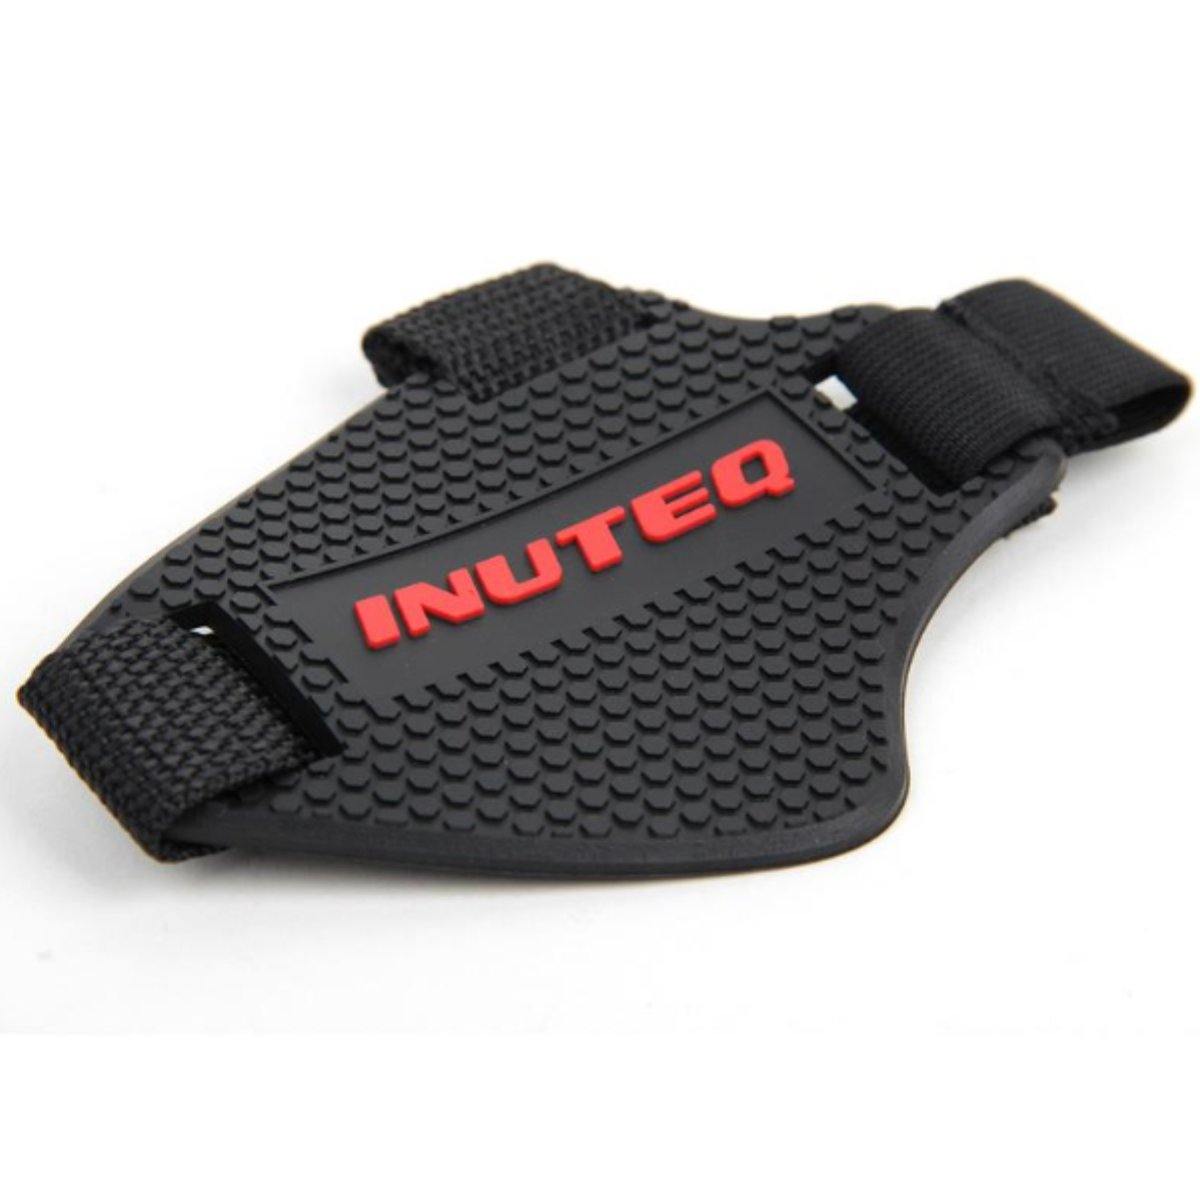 Motorcycle Gear Shift Shoe Pad, Water-Resistant, Adjustable, TPU Soft Rubber - American Legend Rider